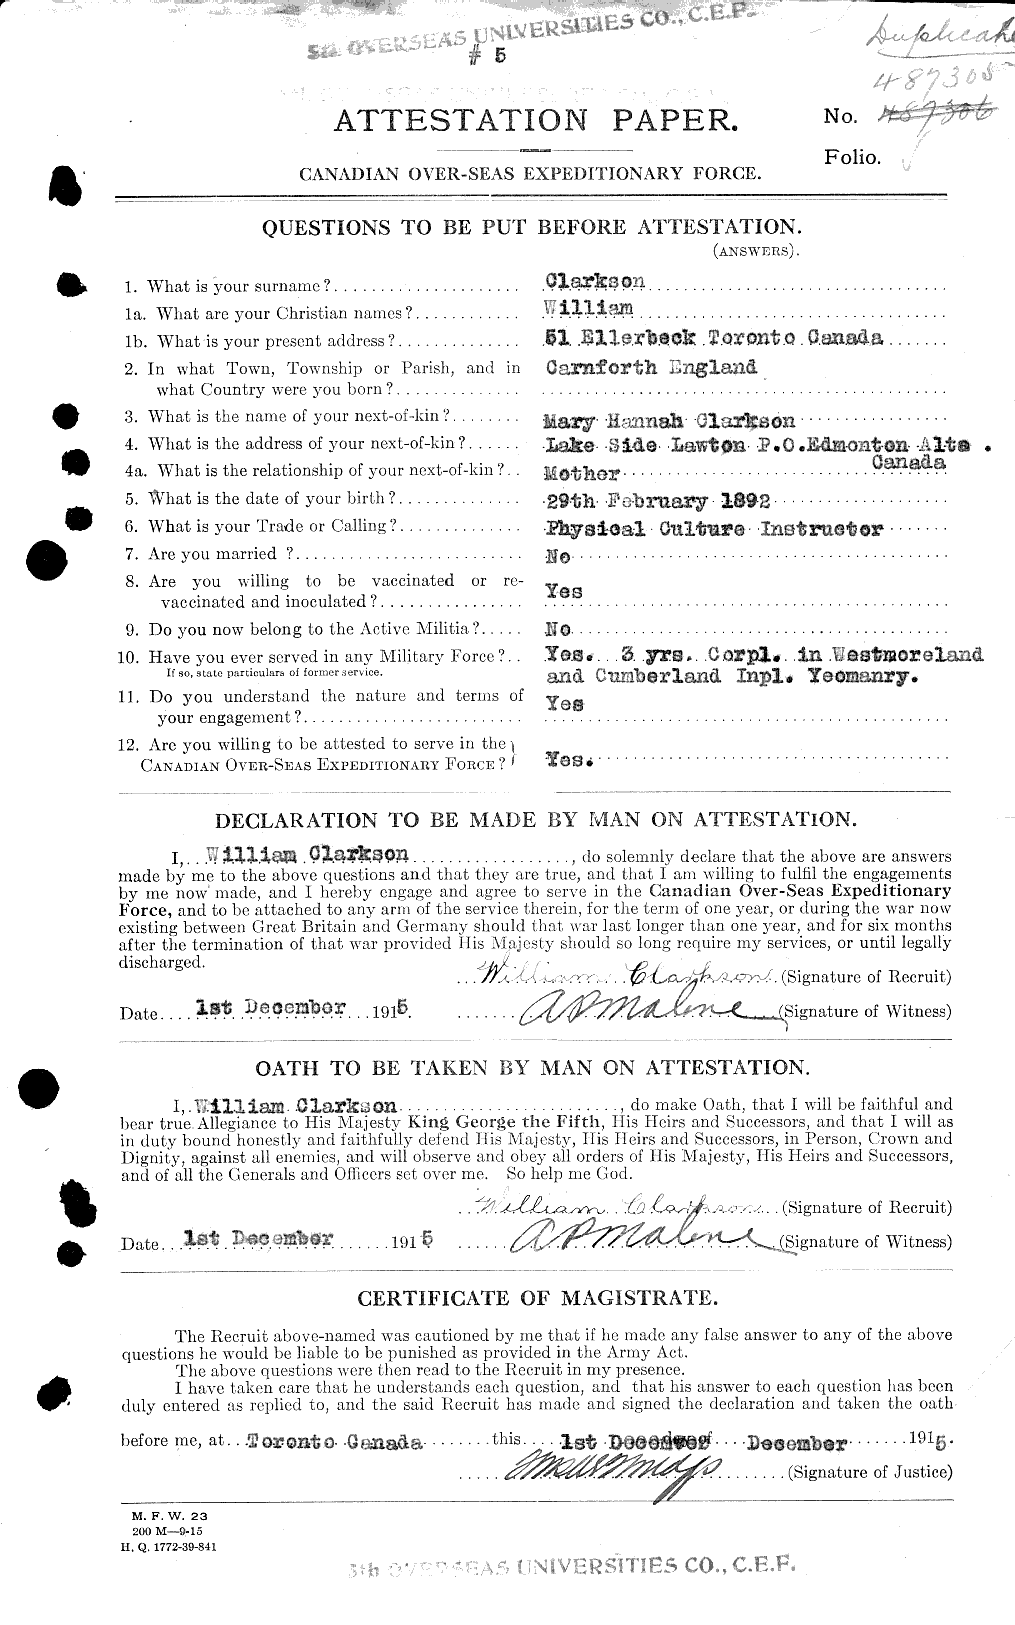 Personnel Records of the First World War - CEF 019018a